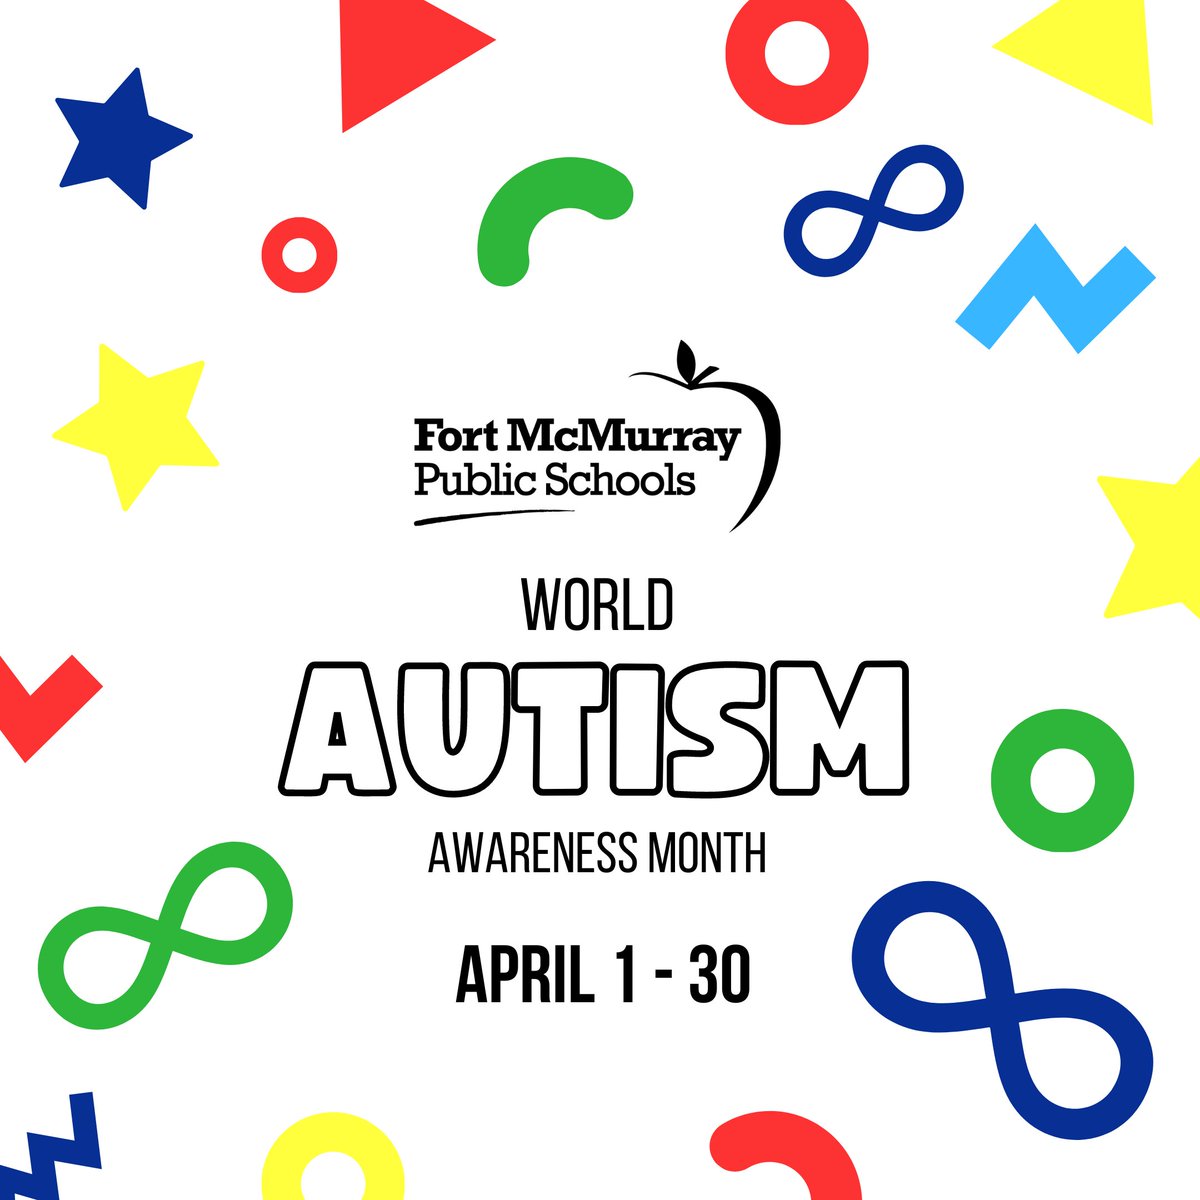 April is Autism Awareness Month and we are proud to celebrate neurodiversity and support our students and community on the spectrum. Understanding starts with awareness. @annaleeskinner #FMPSD #YMM #RMWB